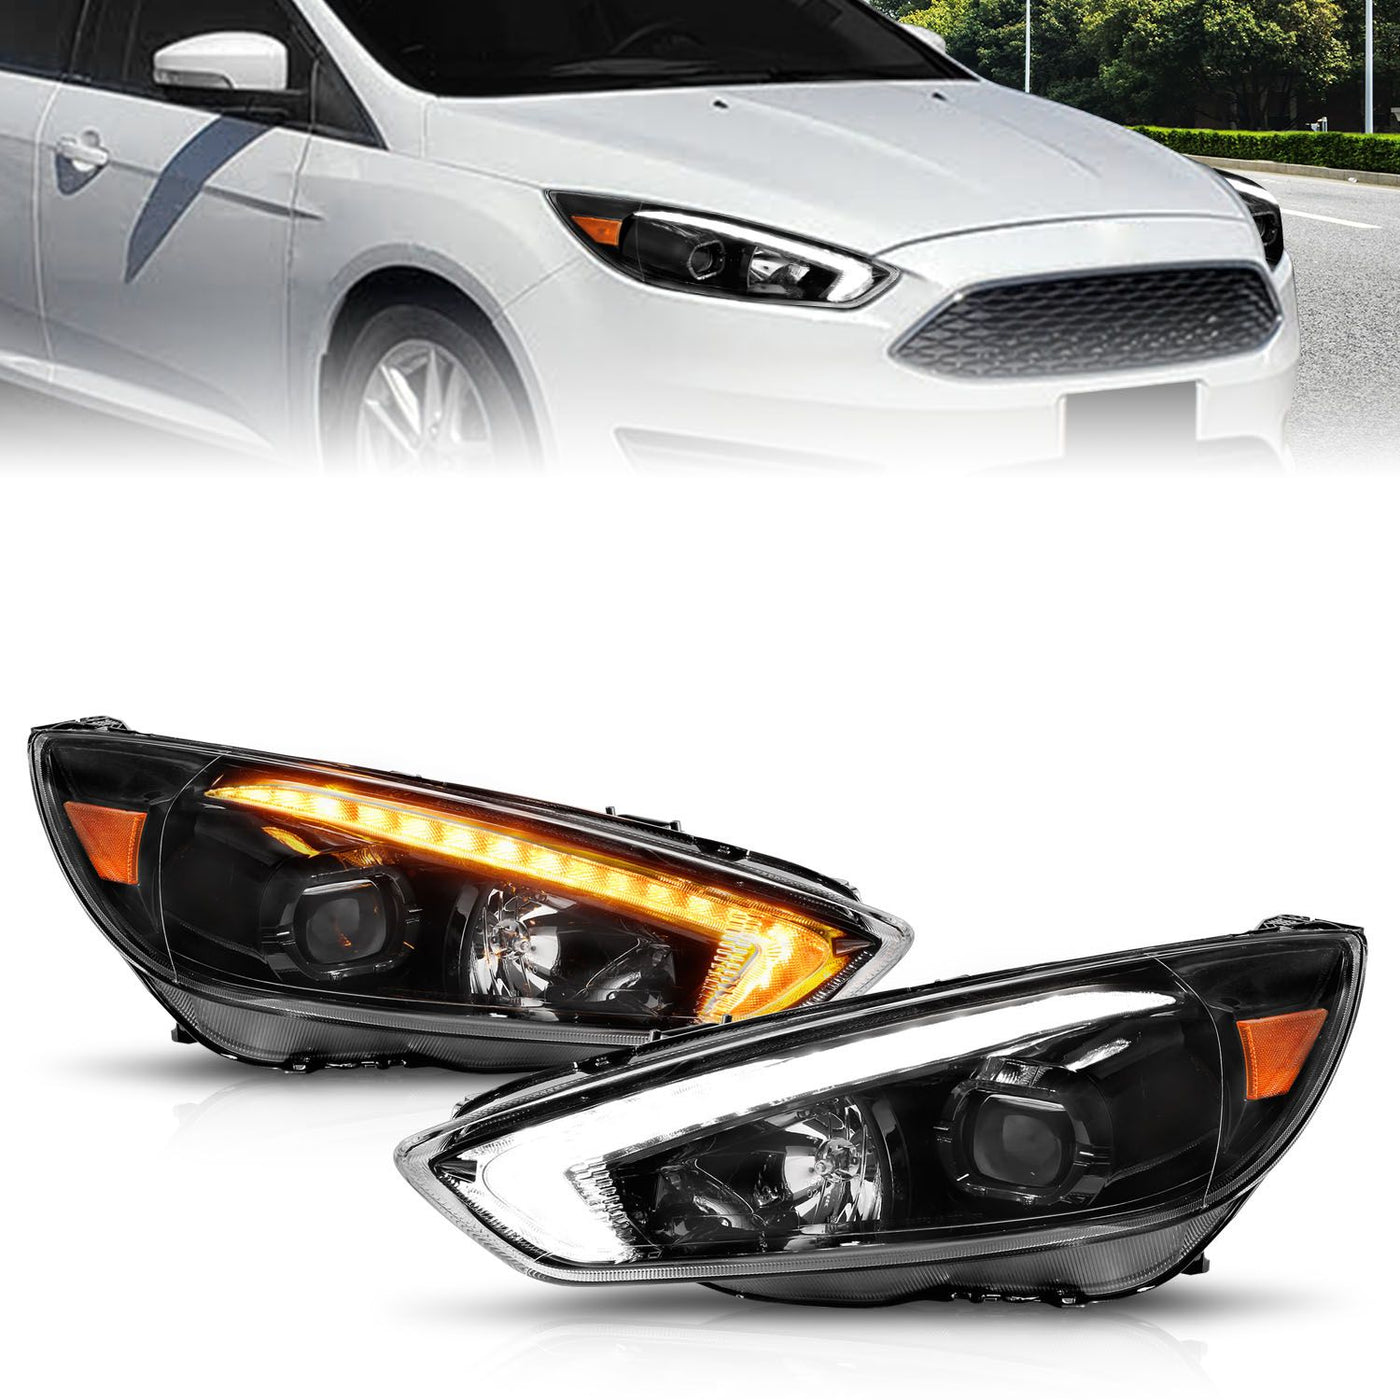 Ford Projector Headlights, Ford Focus Headlights, Ford 15-18 Headlights, Projector Headlights, Black Projector Headlights, Anzo Projector Headlights